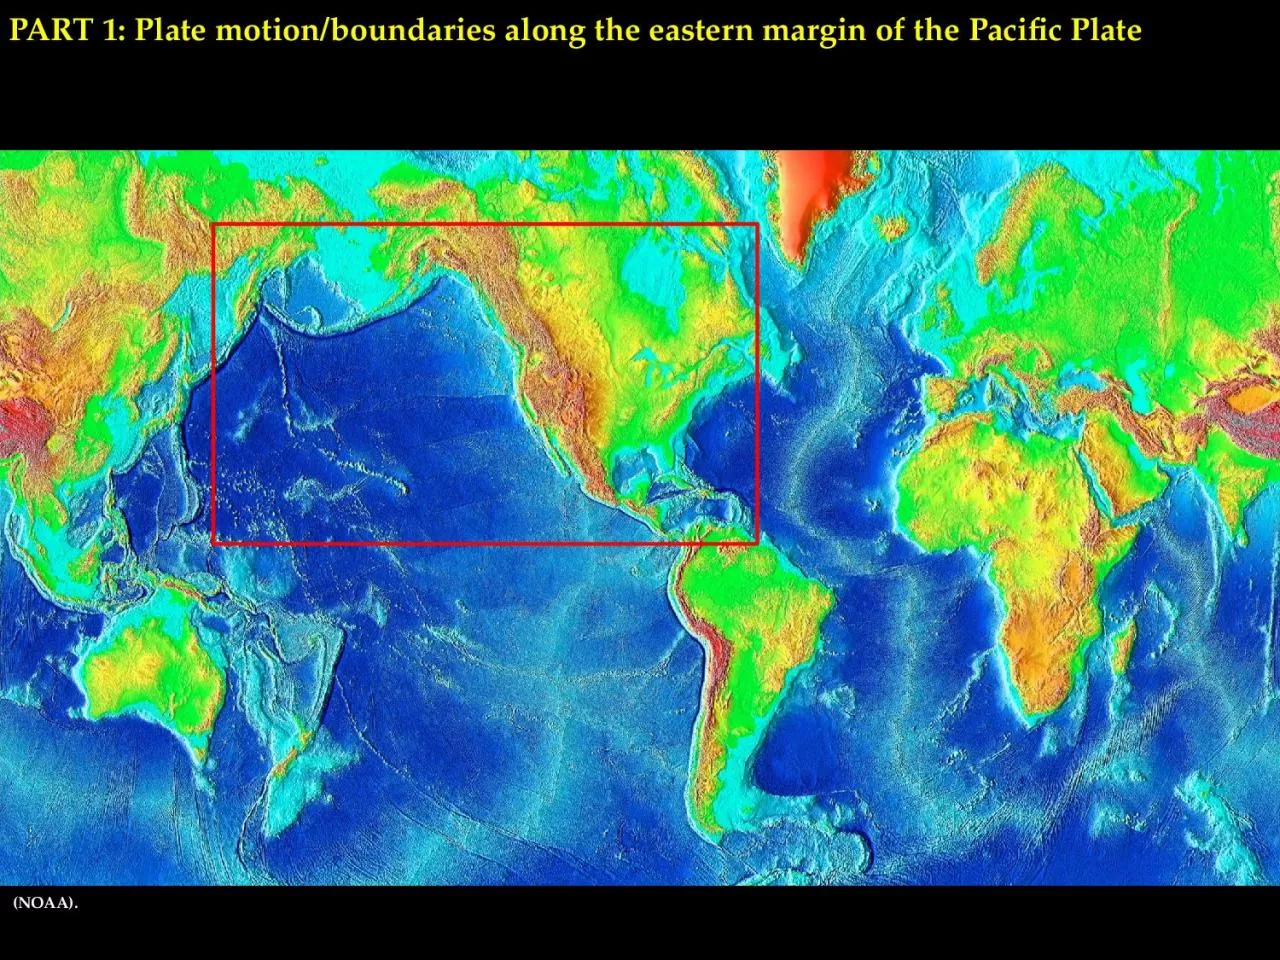 PART 1: Plate motion/boundaries along the eastern margin of the Pacific Plate